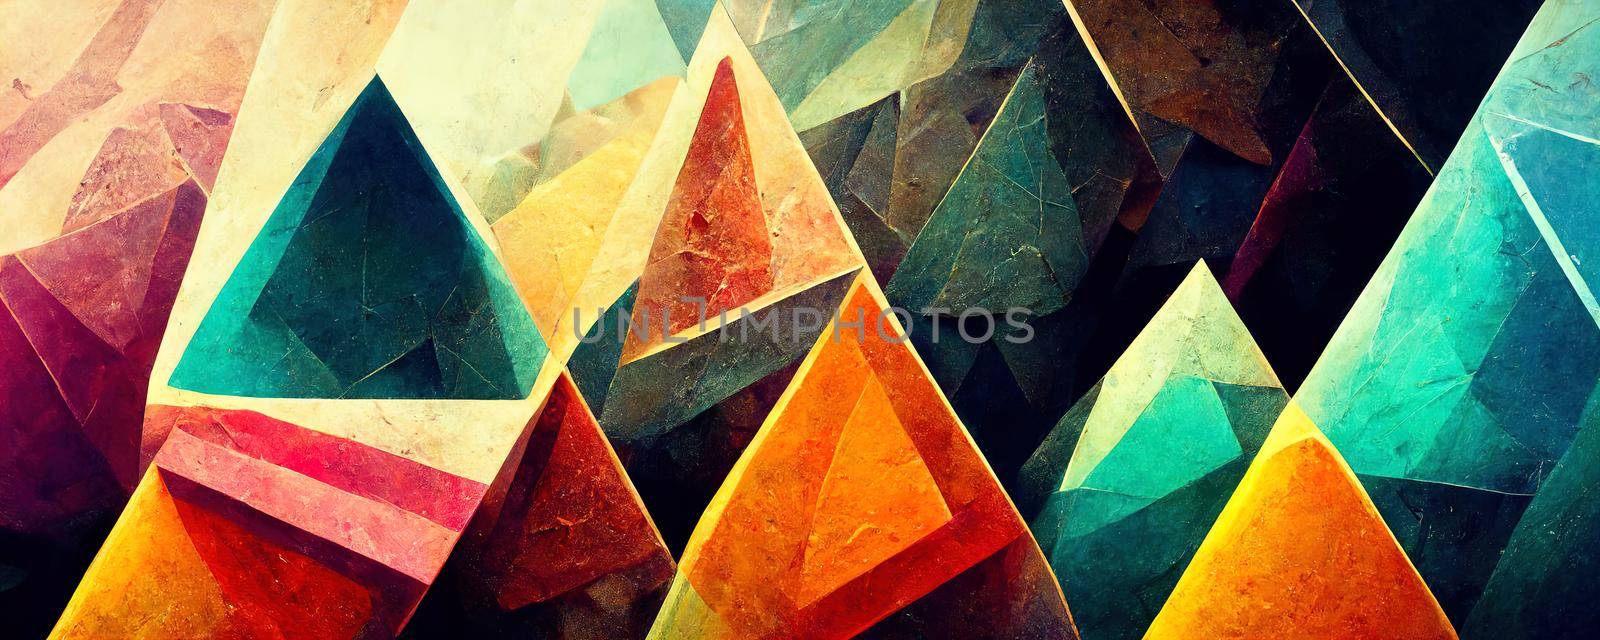 texture in the form of multi-colored relief triangles.